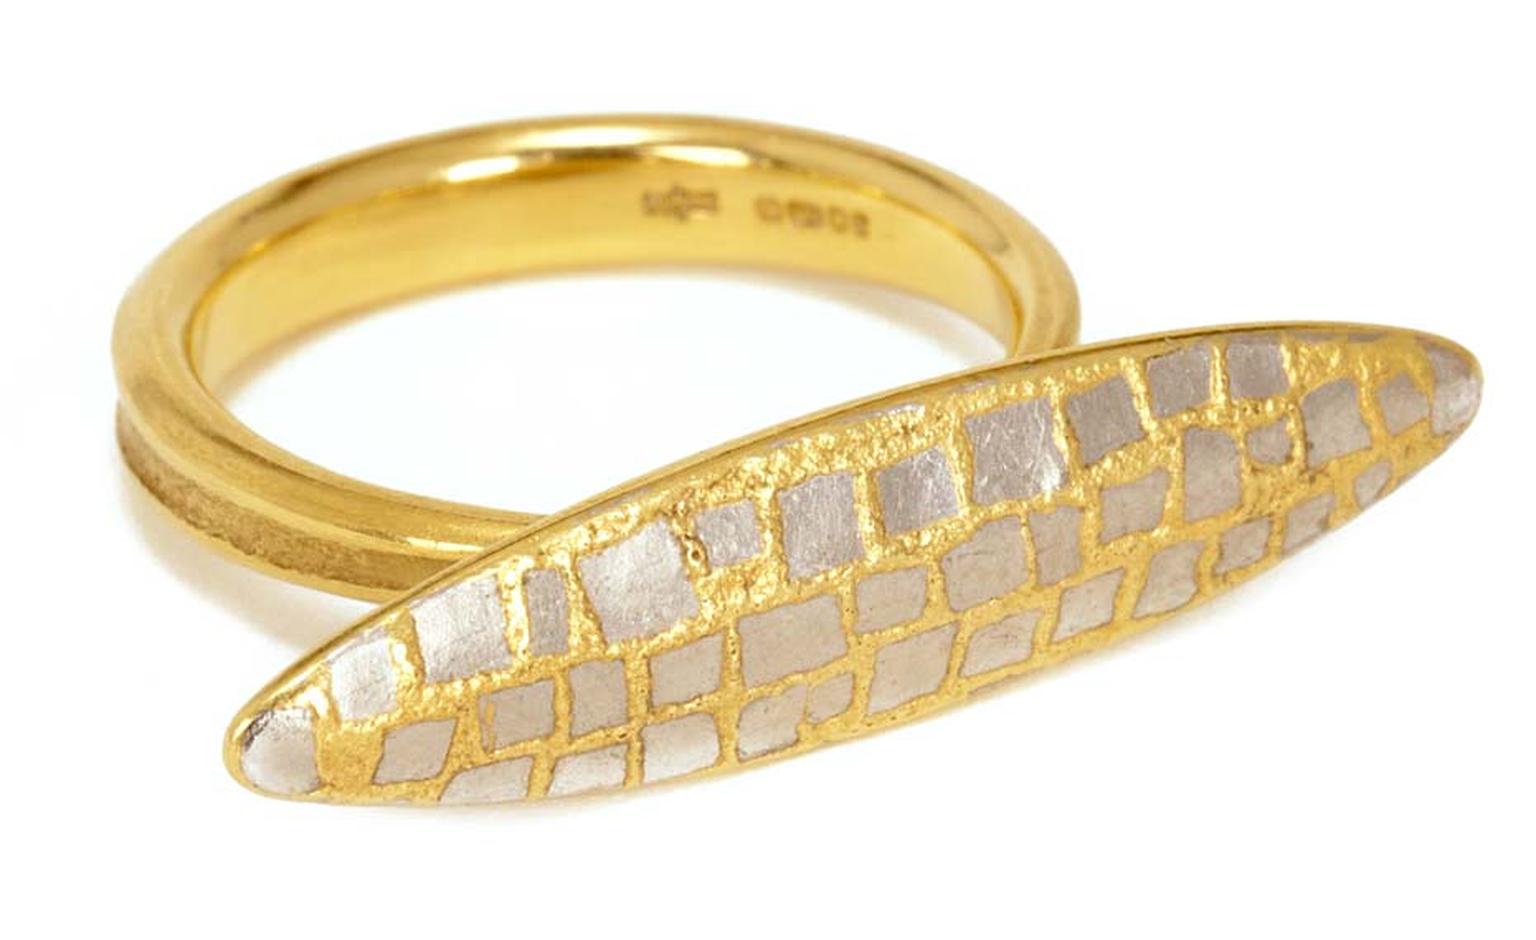 Jacqueline Mina, OBE yellow gold ring with a navette-shaped motif featuring a platinum and yellow gold tessarae design.